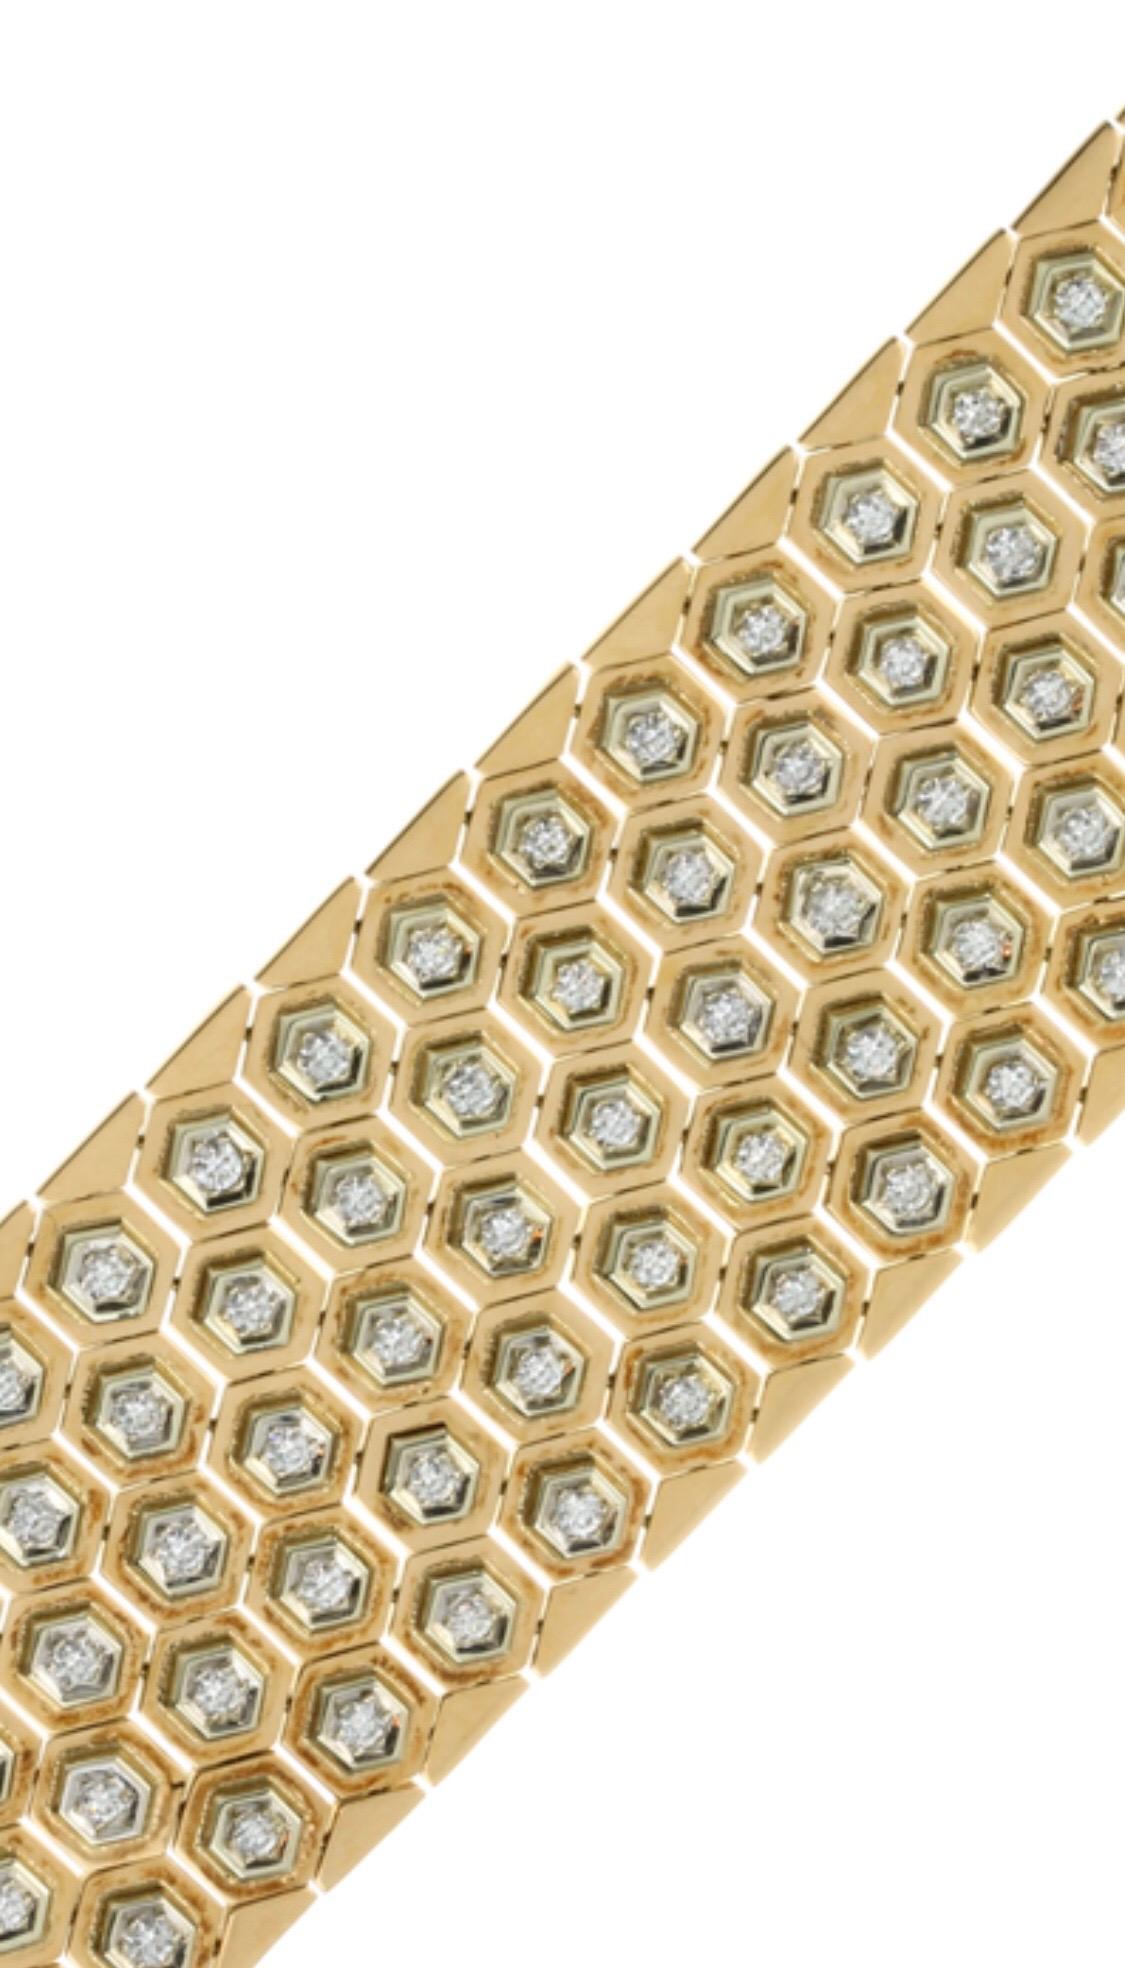 Exquisite and unique diamond fancy link bracelet in 18 Karat yellow gold, probably Italian, comprising five rows of hexagonal honeycomb style links jewelled with round cut diamonds totalling approximately 15 carats, 20.50cm, 170.35 grams.